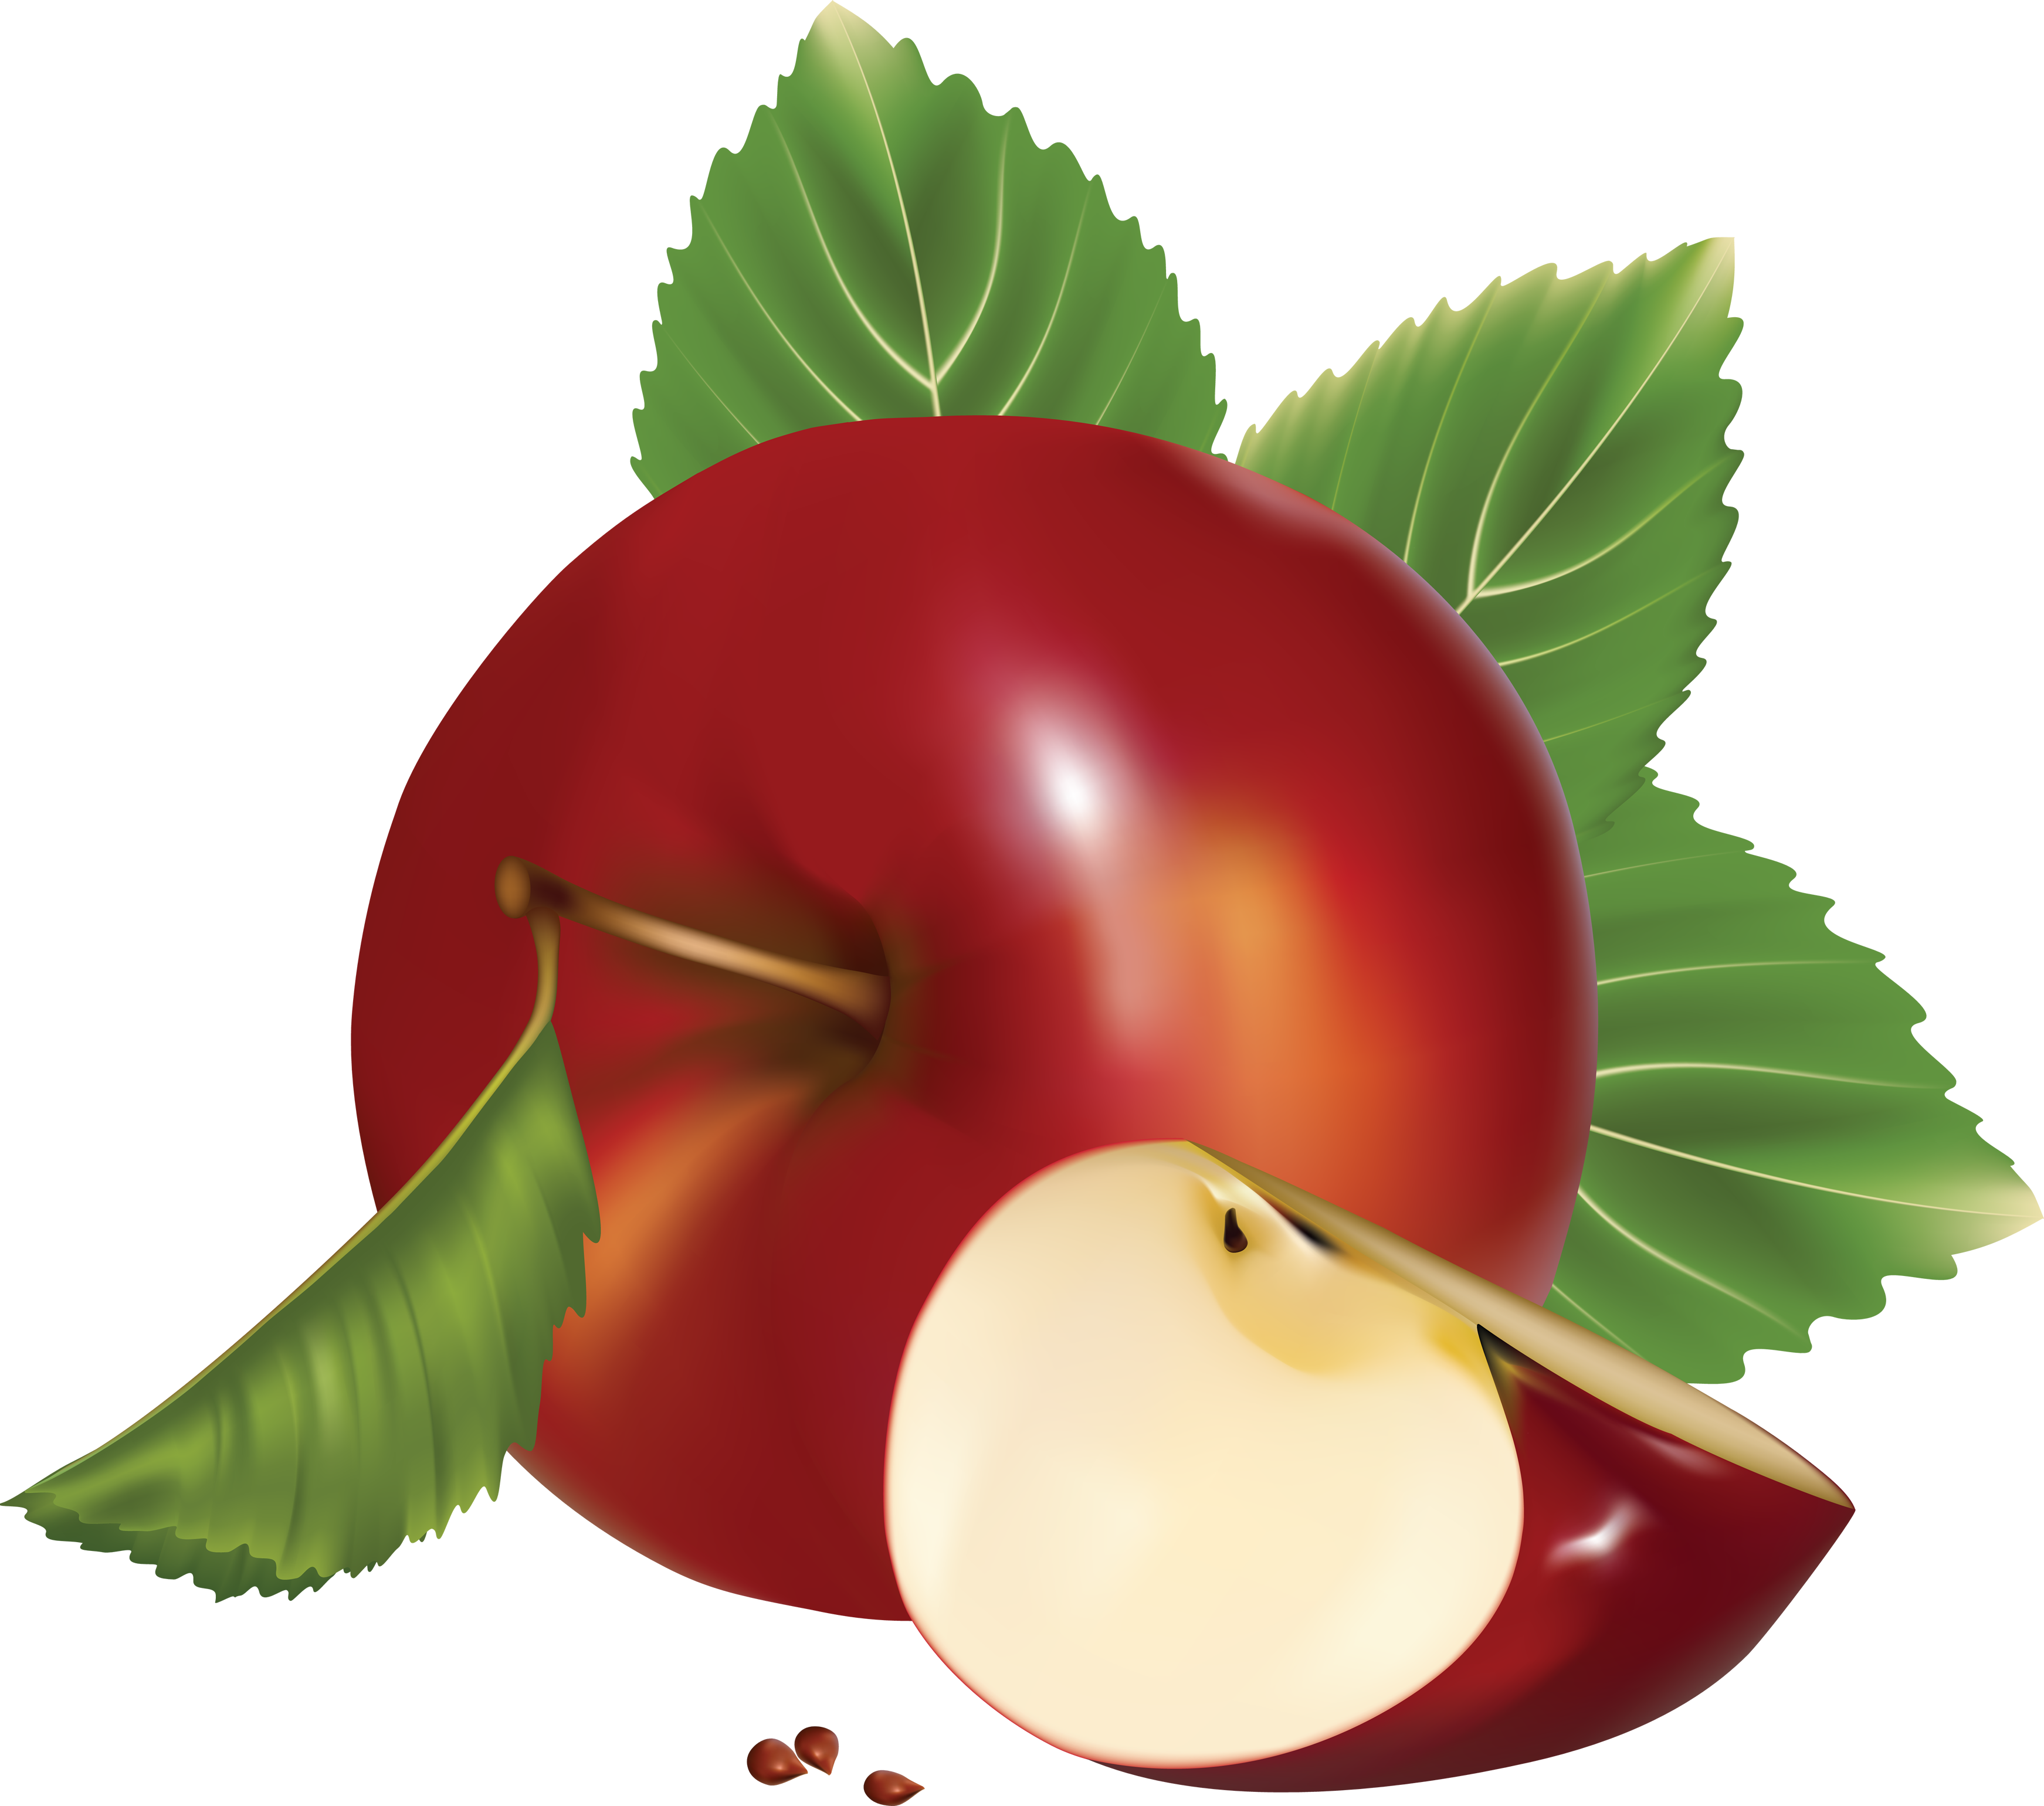 Young clipart apple tree. Fresh red with green